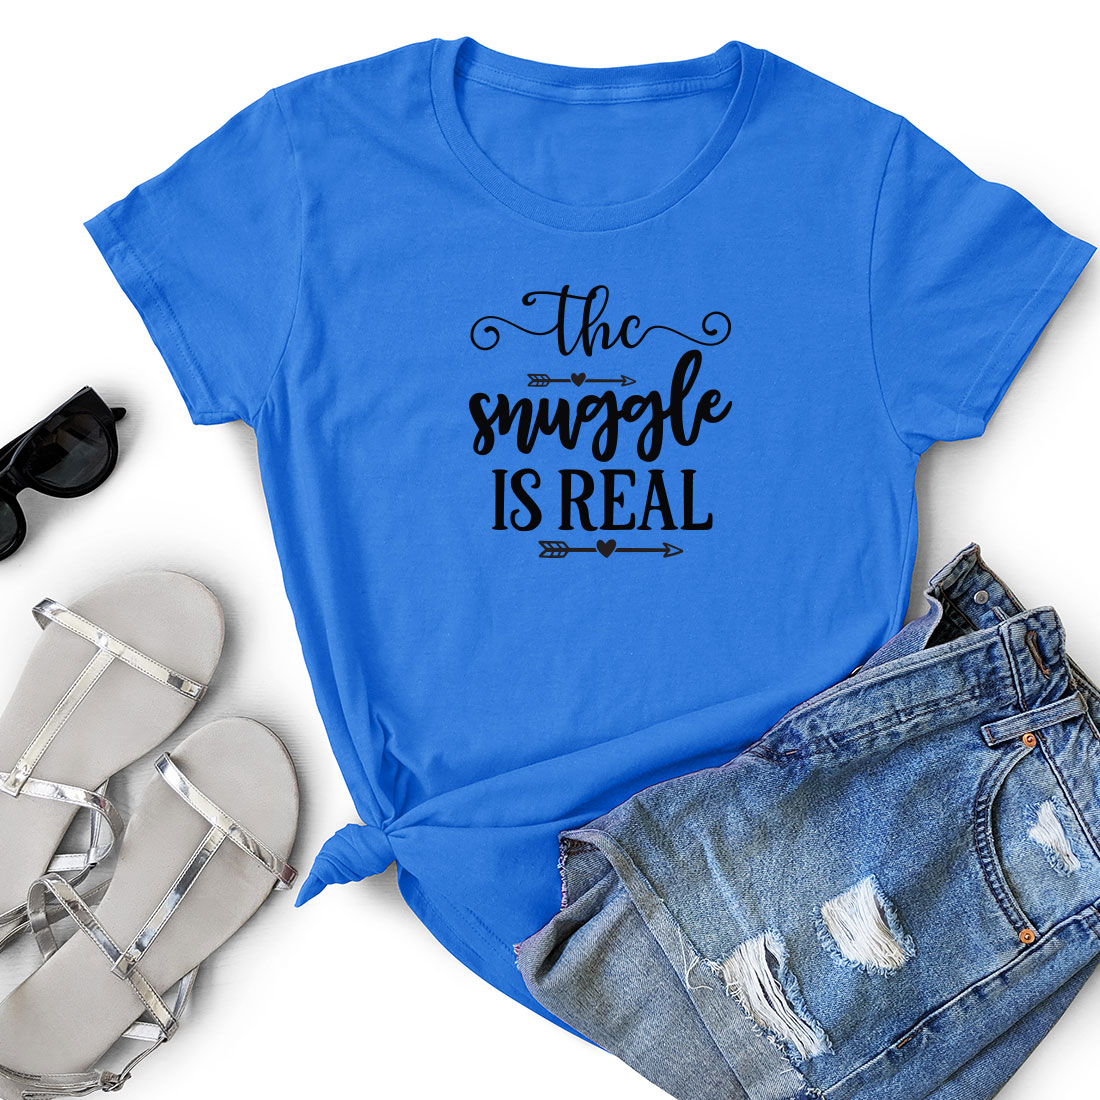 T - shirt that says the struggle is real next to a pair of shorts.